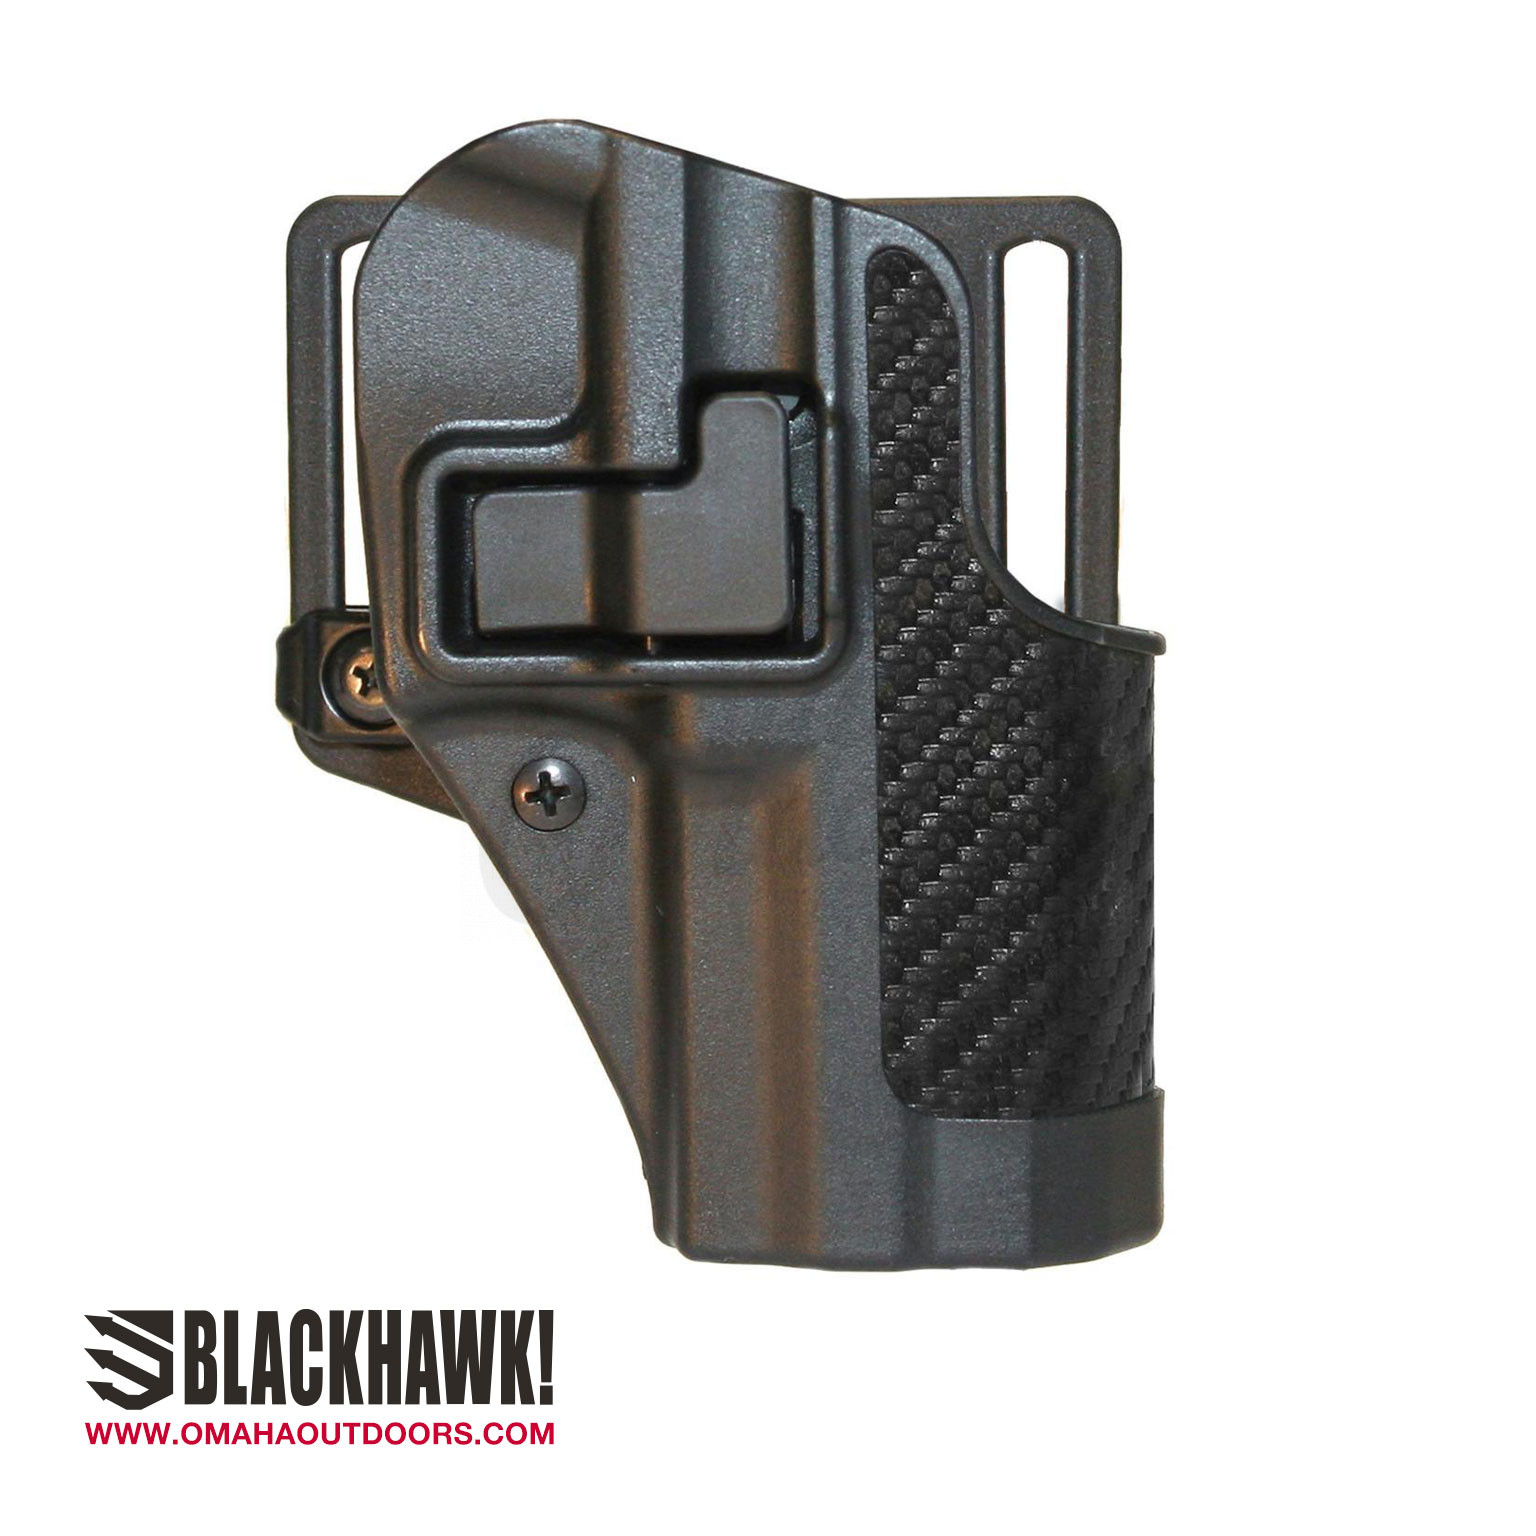 New Blackhawk Holster Fits Colt 1911 & Clones XIPHOS Weapons Light Right Hand